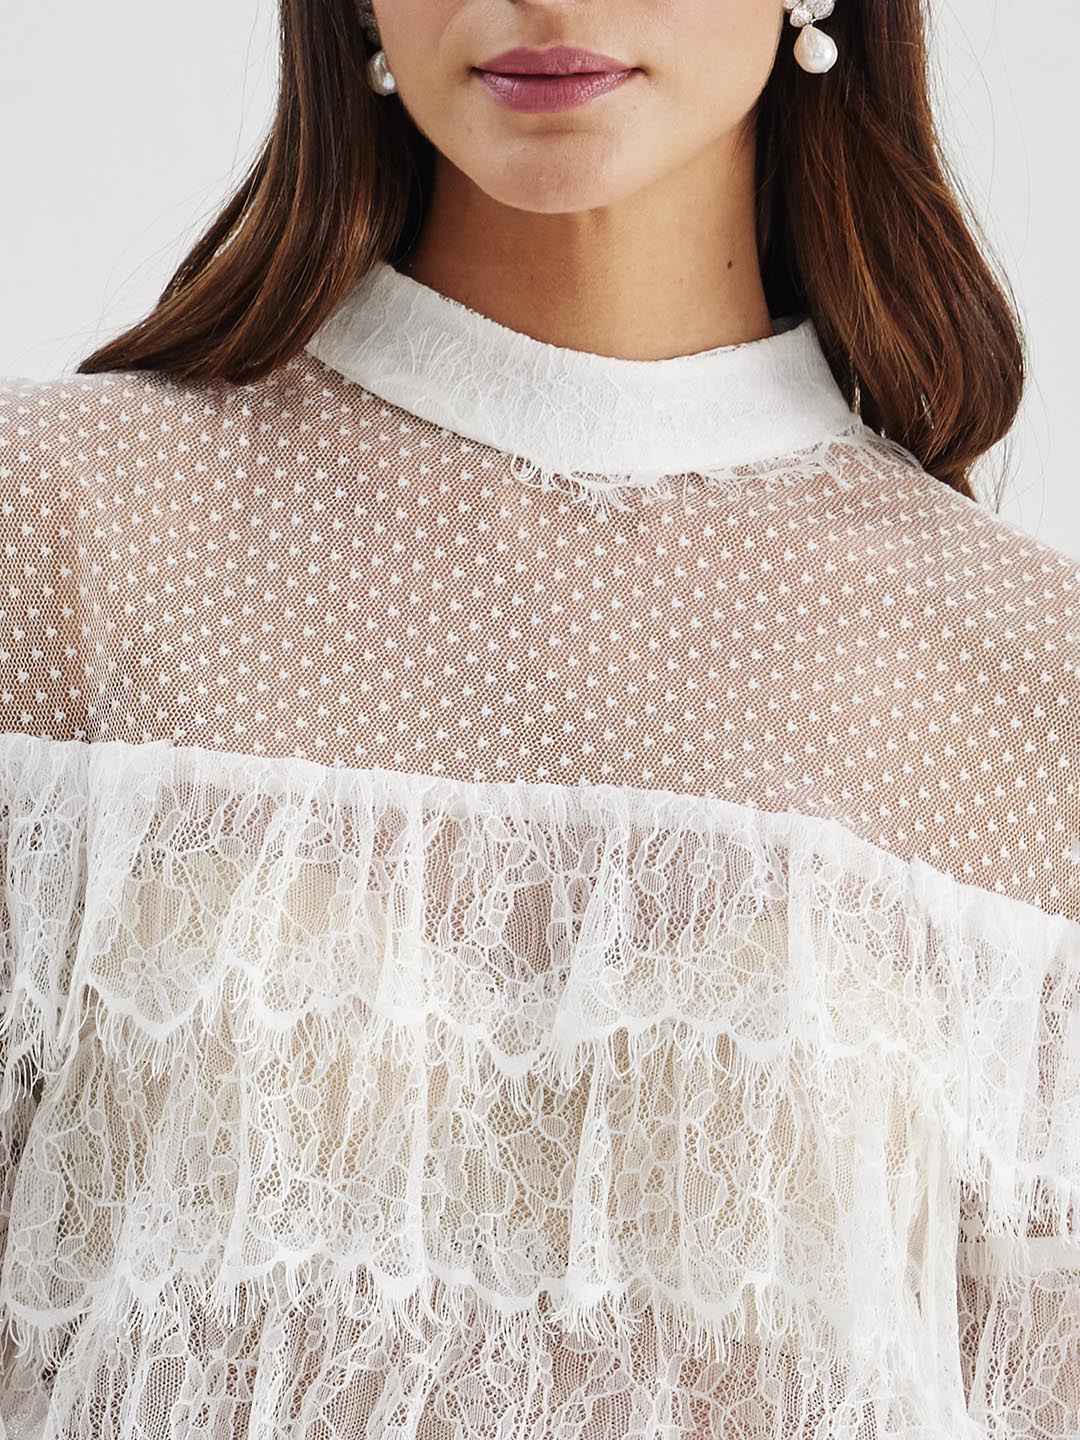 Ava Trimmed Lace Blouse White